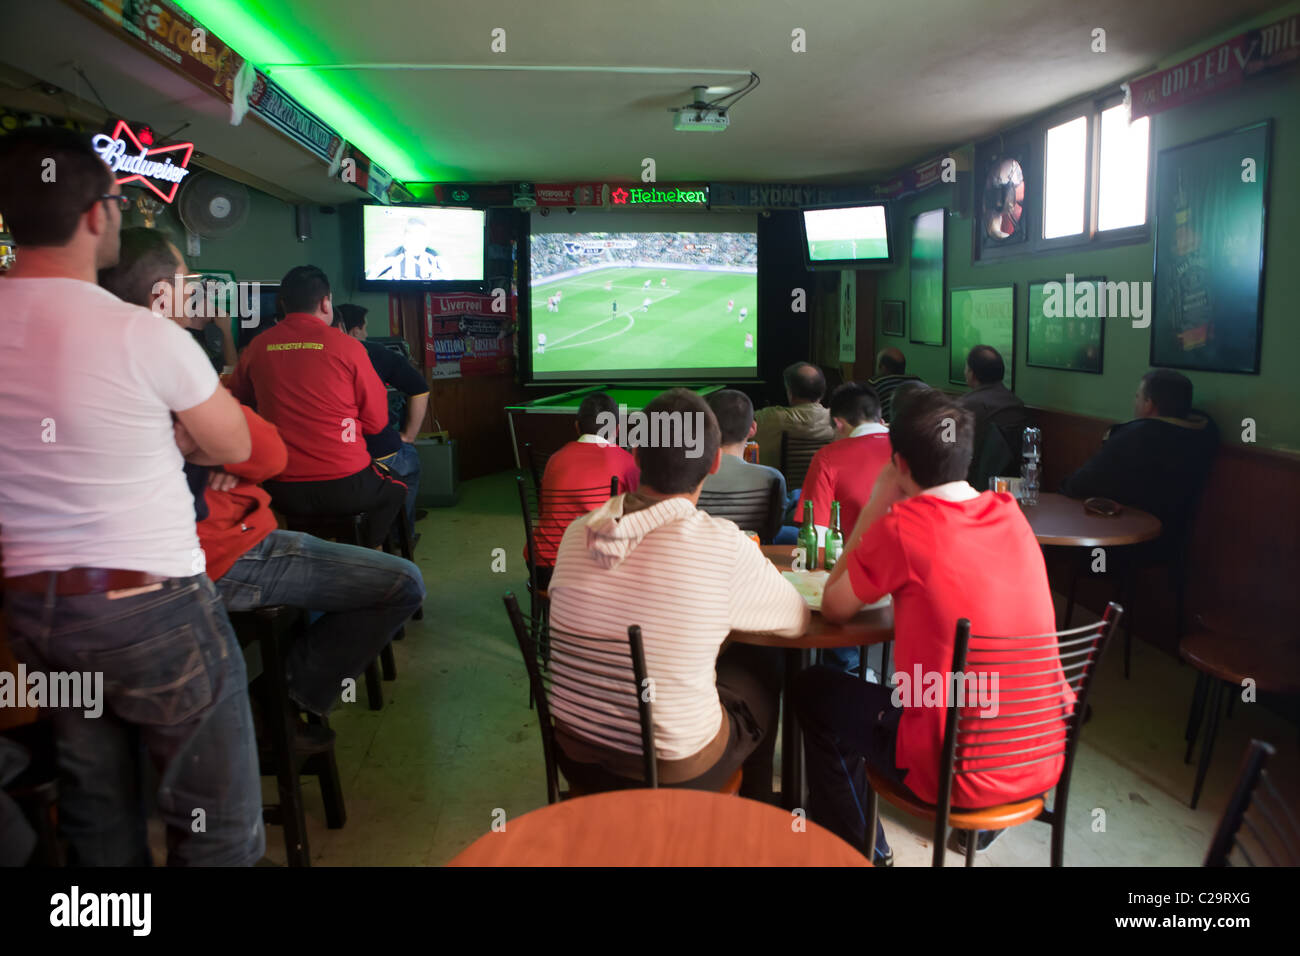 A group of men supporting Manchester United in a Maltese Bar Stock Photo